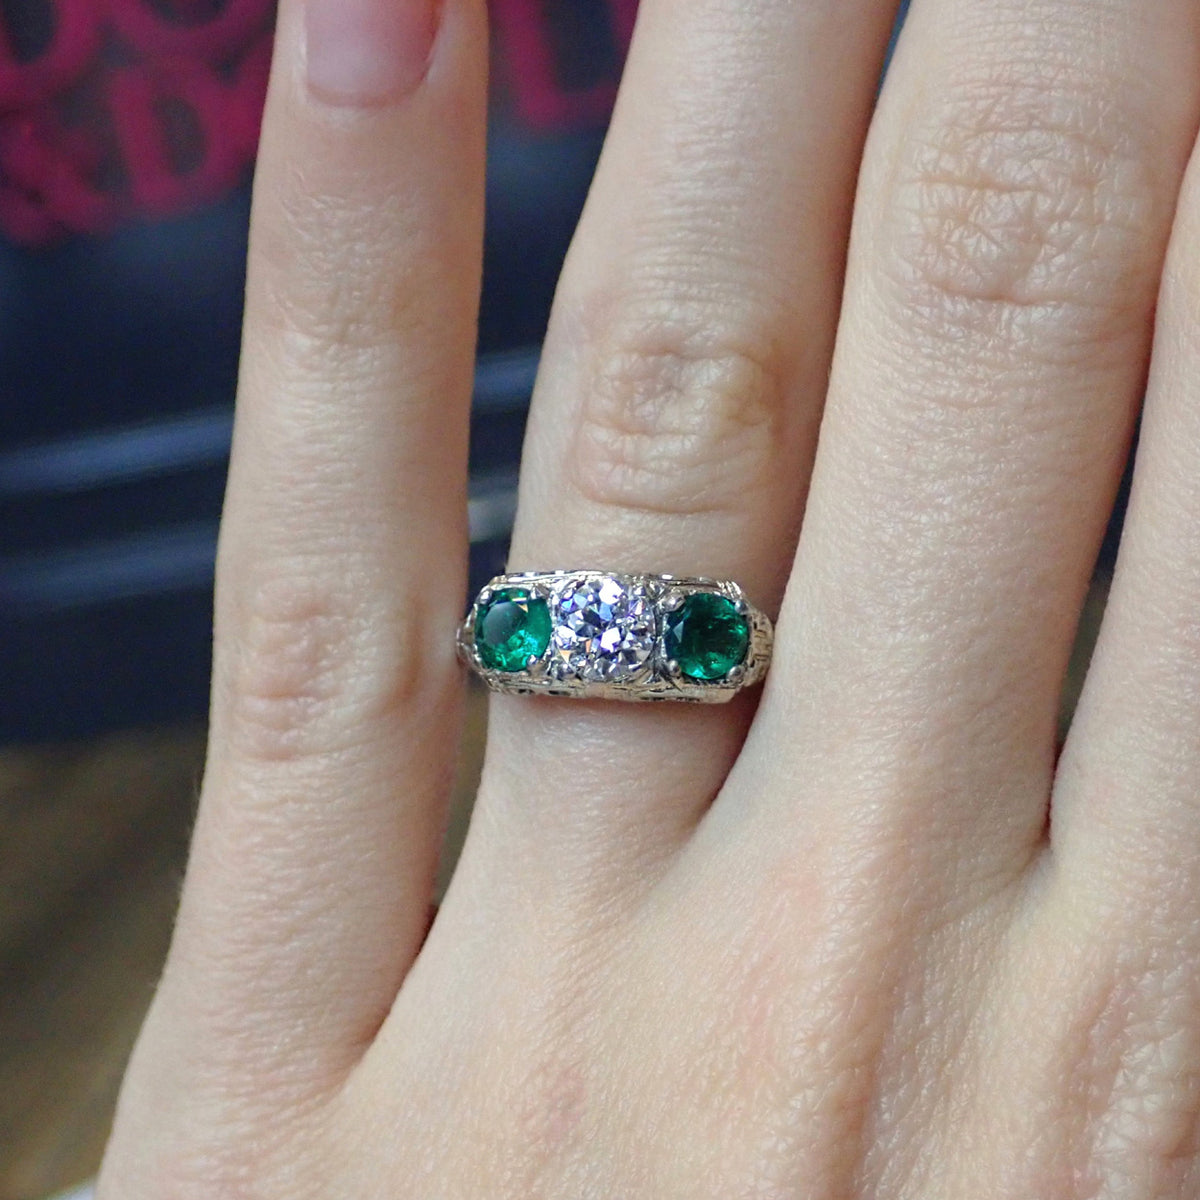 Vintage Diamond & Emerald Ring sold by Doyle and Doyle an antique and vintage jewelry boutique.